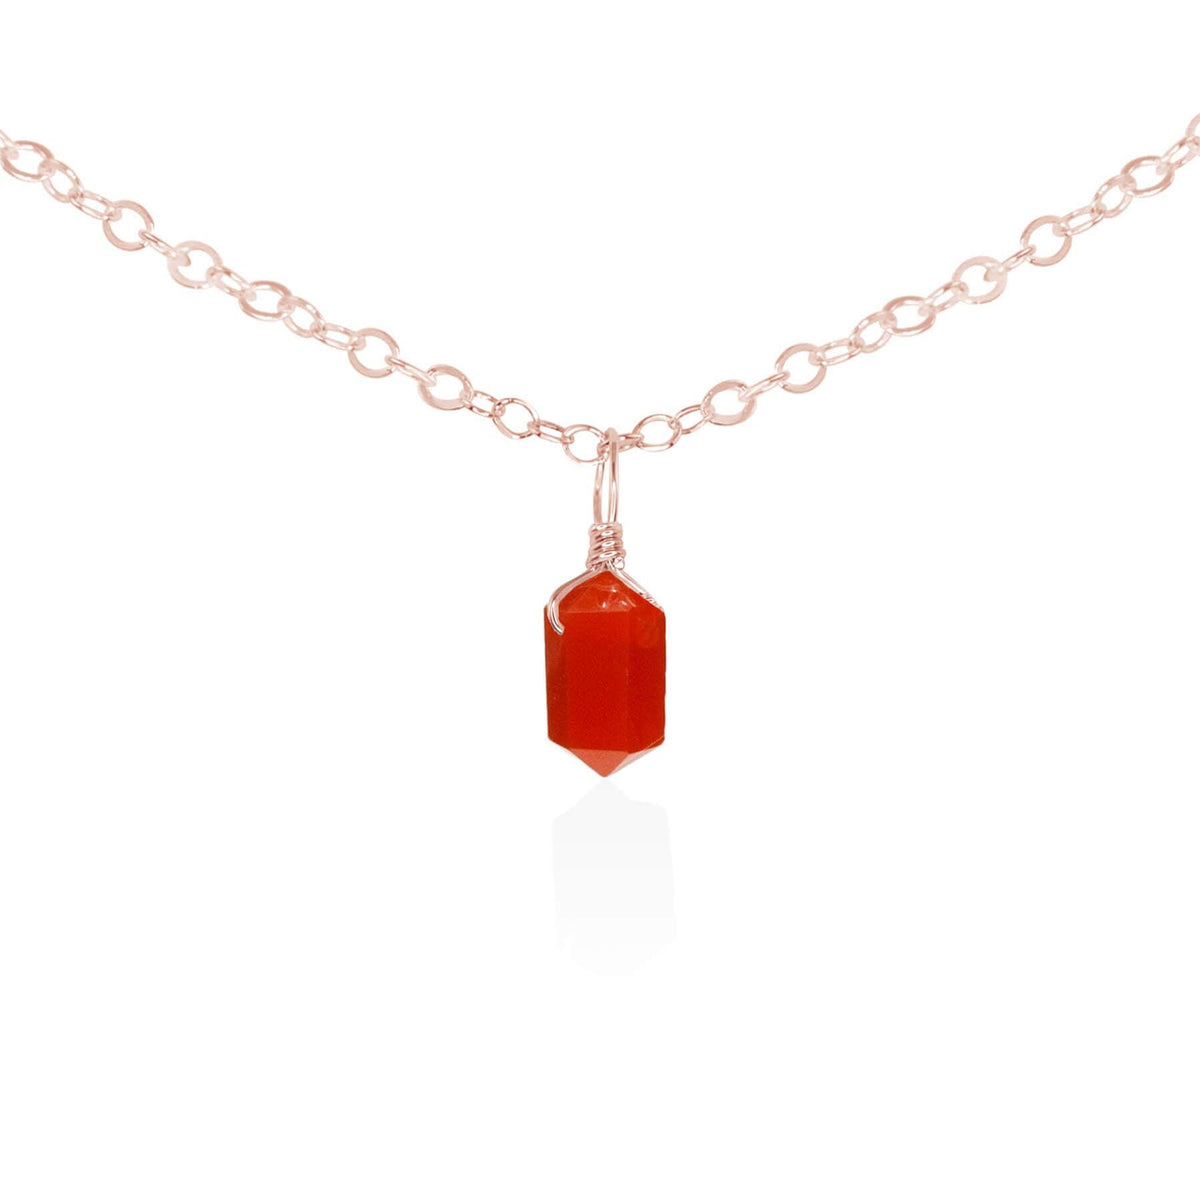 Carnelian Mini Double Terminated Crystal Point Pendant Choker Necklace - Carnelian Mini Double Terminated Crystal Point Pendant Choker Necklace - 14k Rose Gold Fill / Cable - Luna Tide Handmade Crystal Jewellery